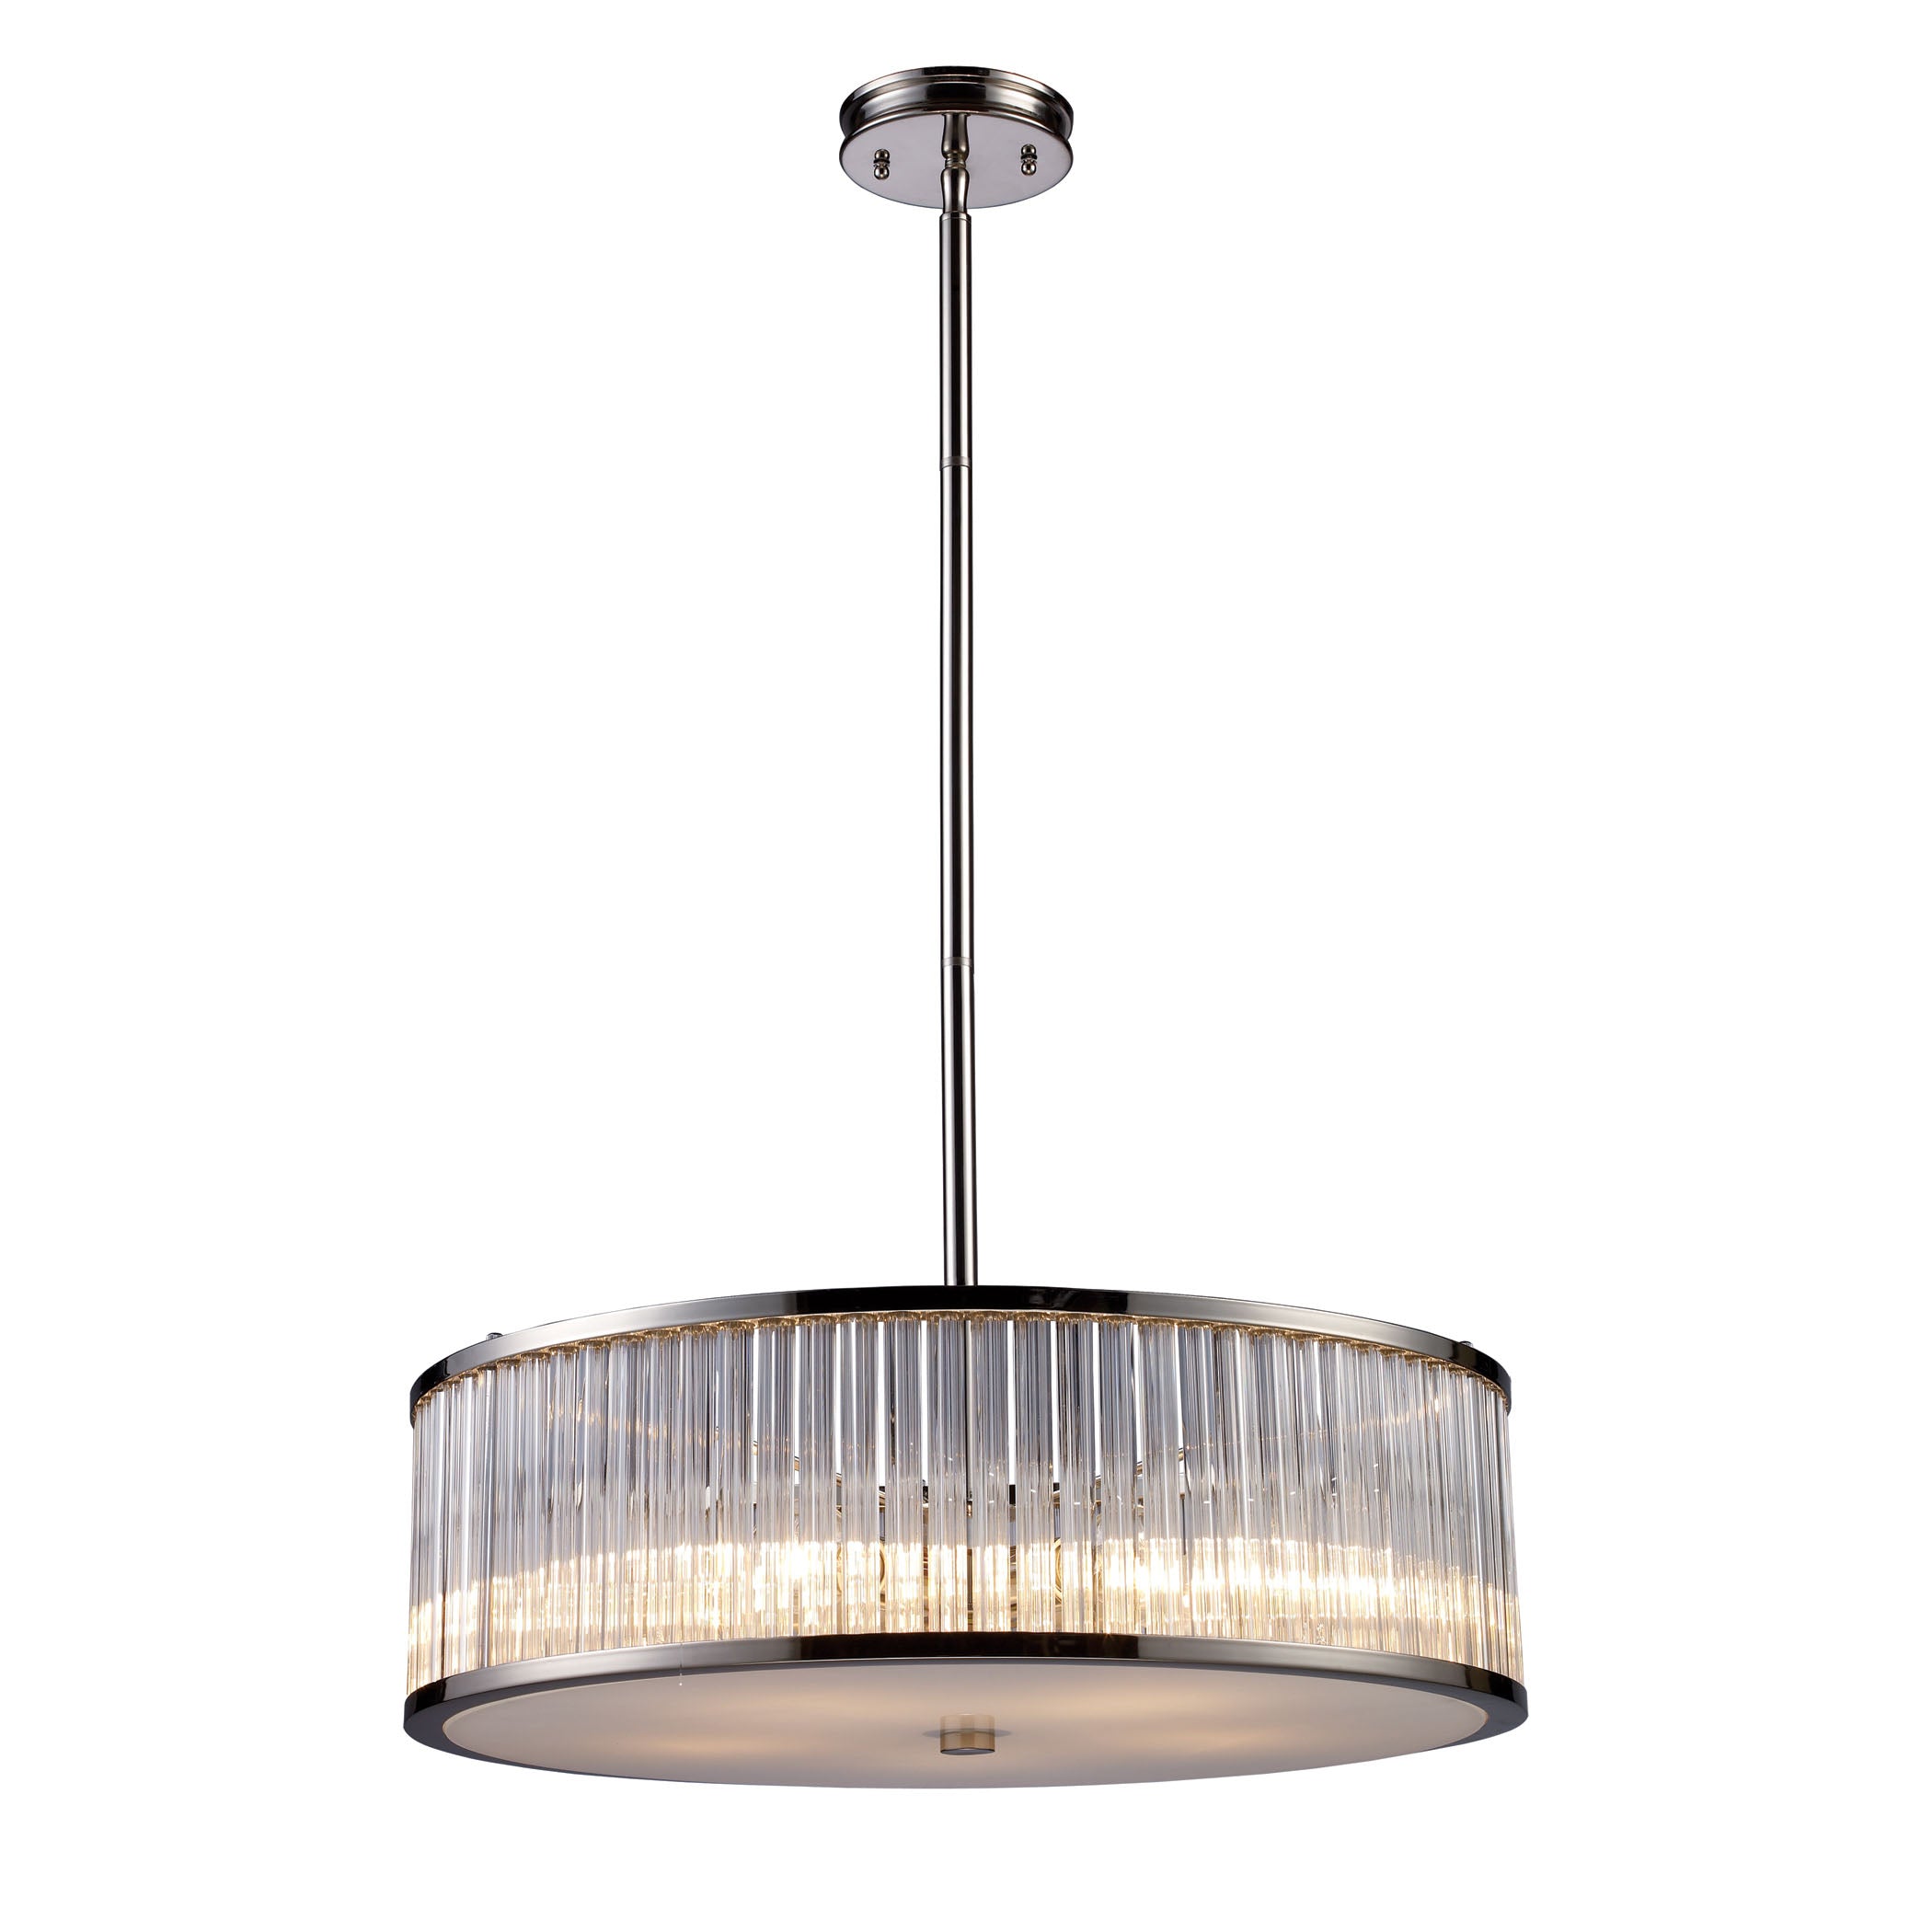 ELK Lighting 10129/5 Braxton 5-Light Chandelier in Polished Nickel with Ribbed Glass Cylinder Shade